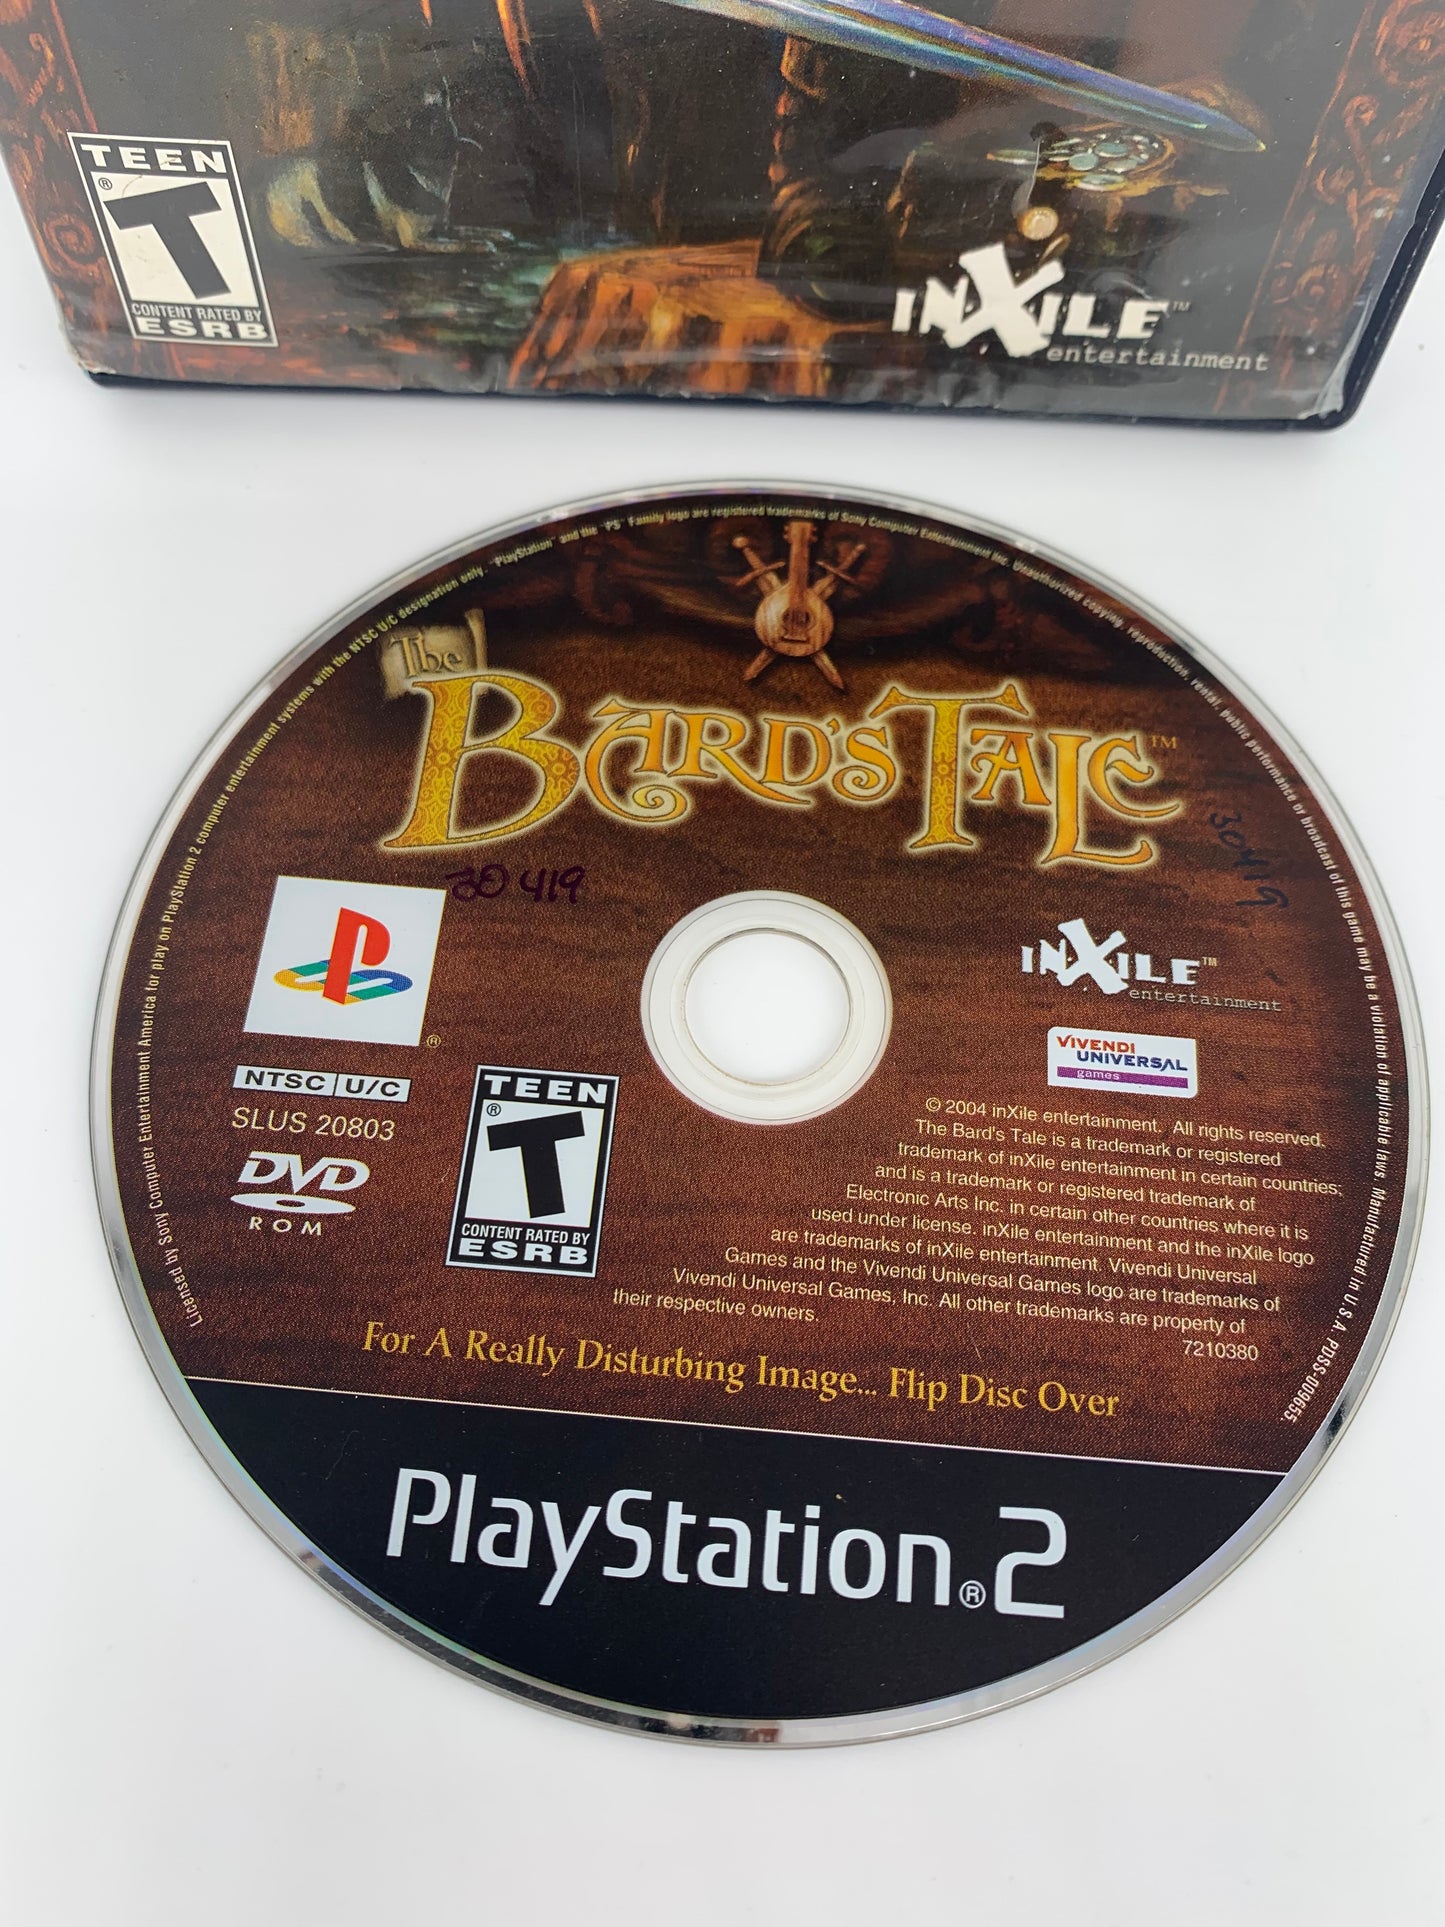 SONY PLAYSTATiON 2 [PS2] | THE BARDS TALE